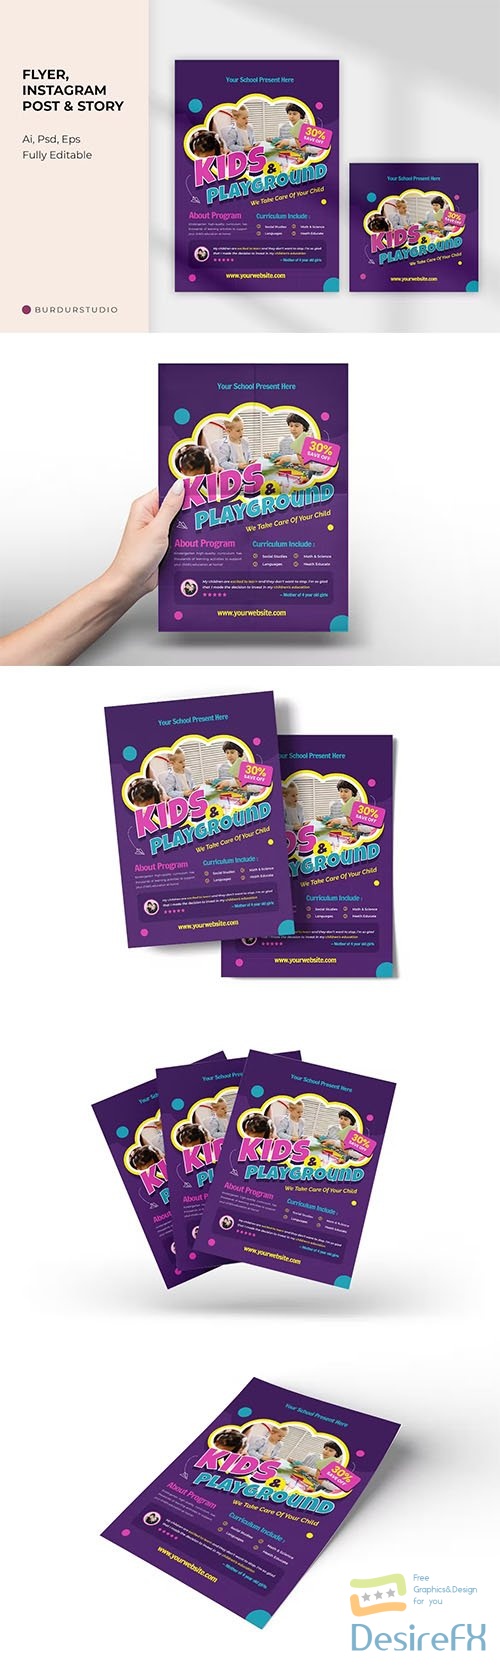 Kids Play Course Flyer & Instagram Post PSD